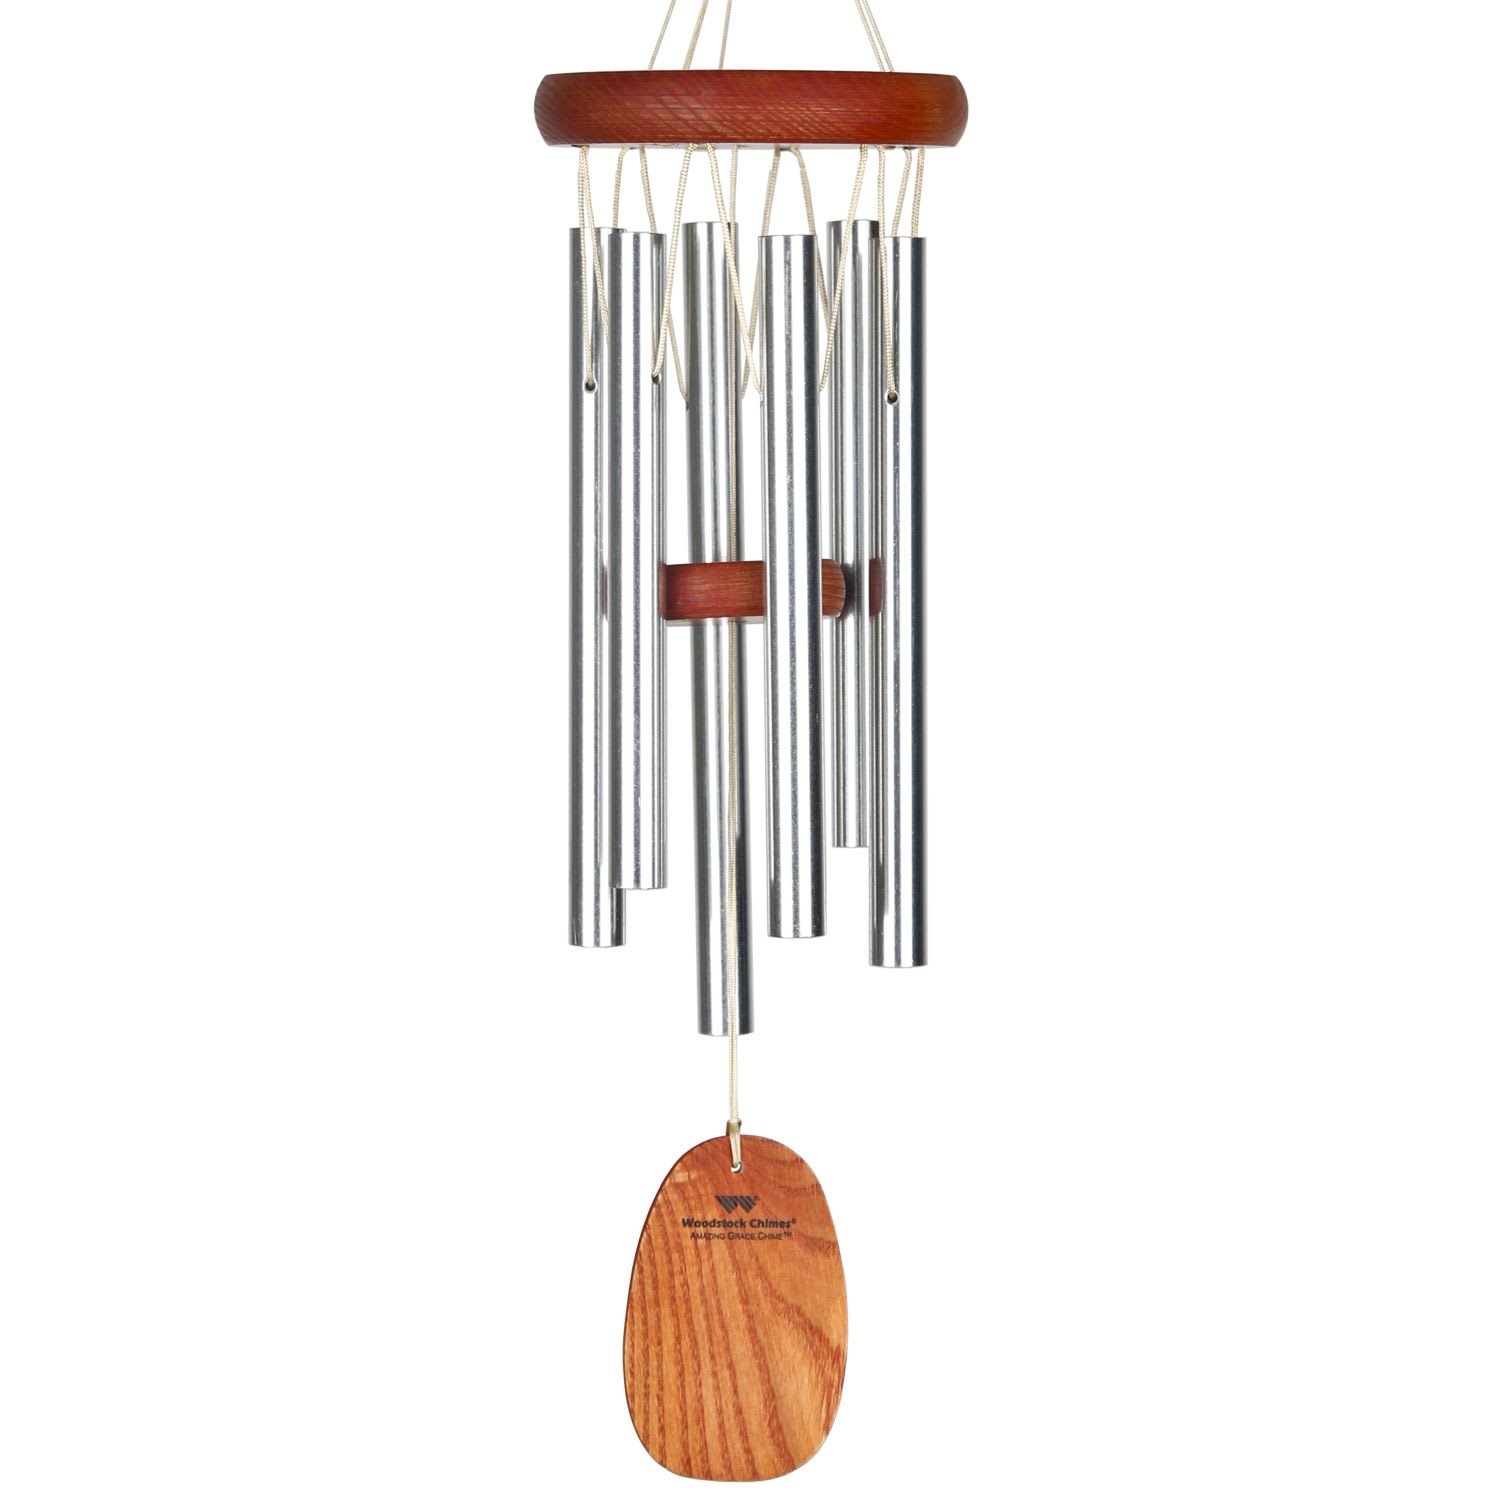 Woodstock Windchime Small Silver - Amazing Grace - Woodstock Windchimes are musically tuned and a beautiful way to show remembrance.  For deliveries of small chimes, the chimes will be presented in a box. The stands we carry only fit the medium and large size of chimes.